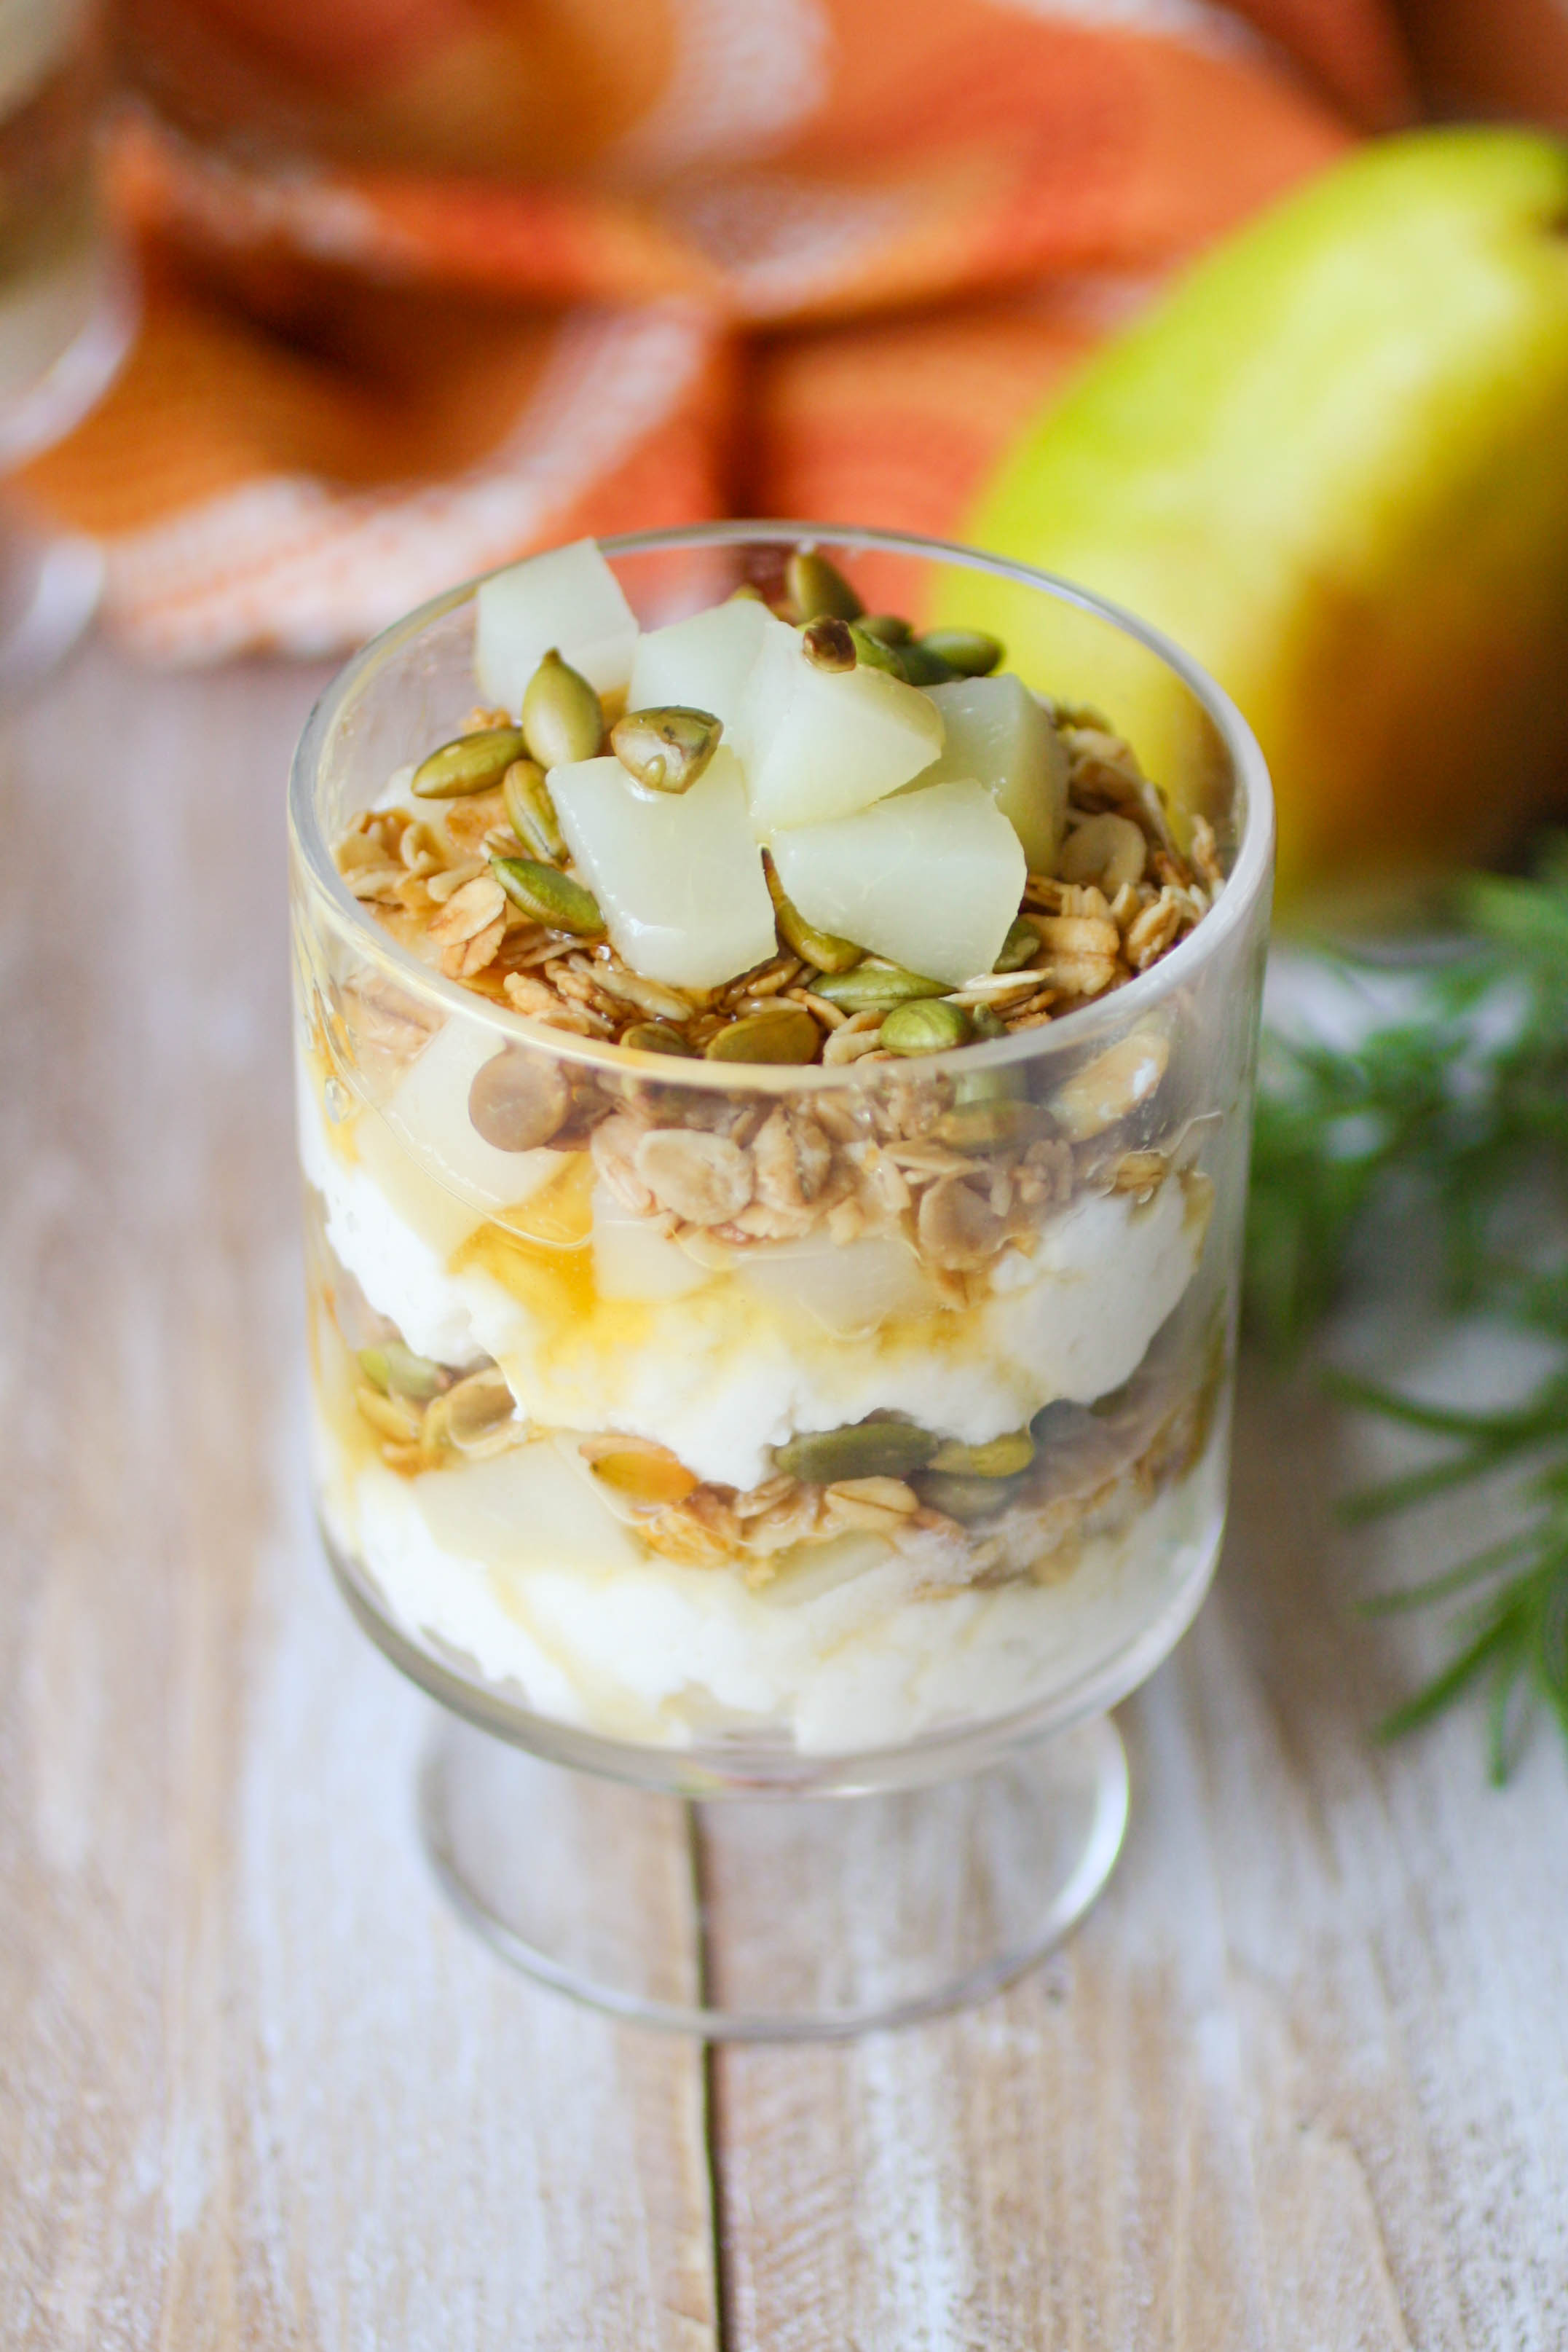 Pear and Ricotta Parfaits with Rosemary-infused Honey